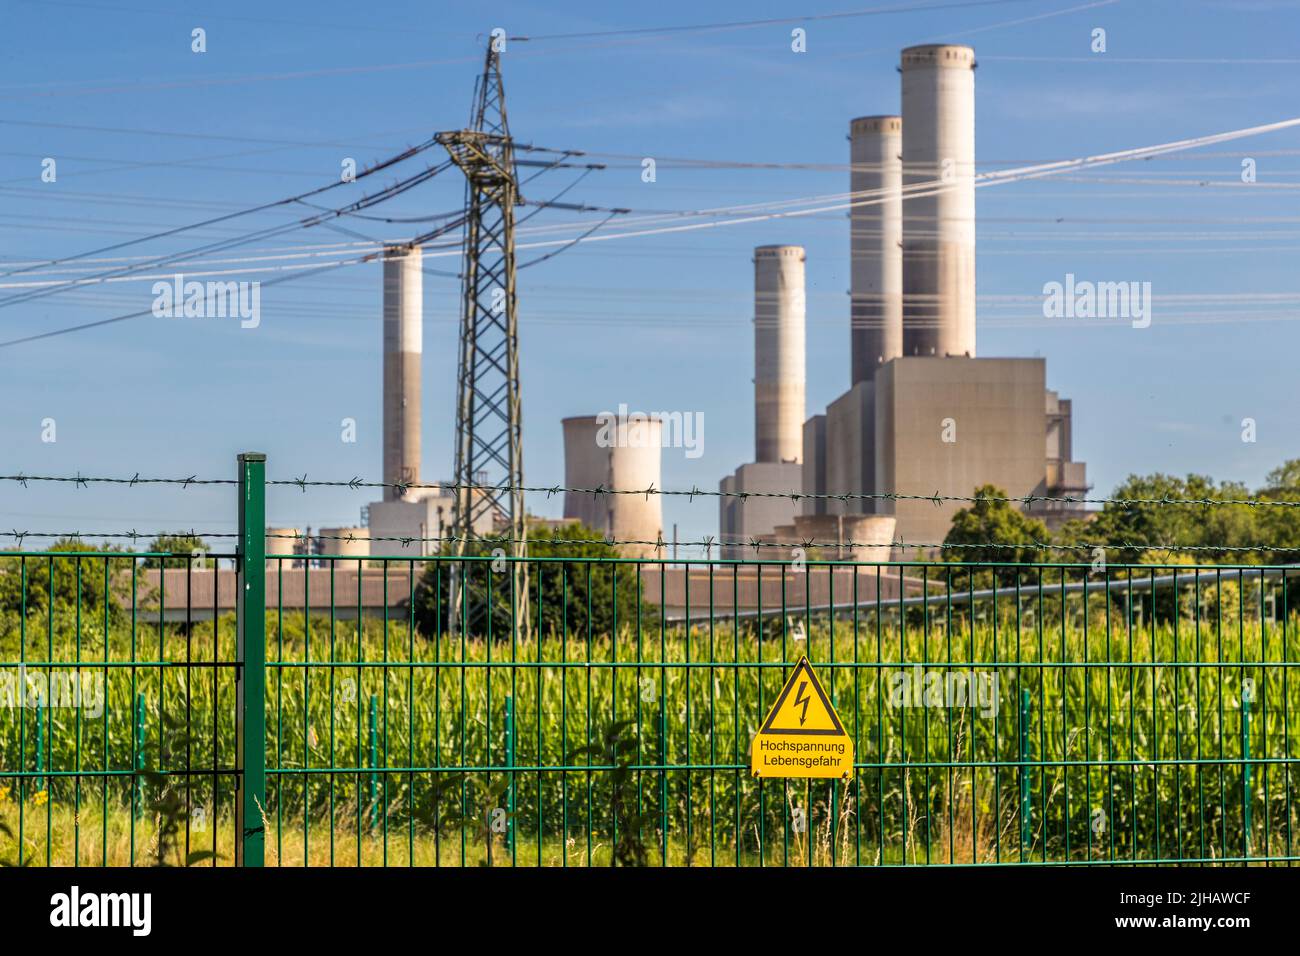 The decommissioned Frimmersdorf lignite-fired power plant near Grevenbroich, Germany Stock Photo